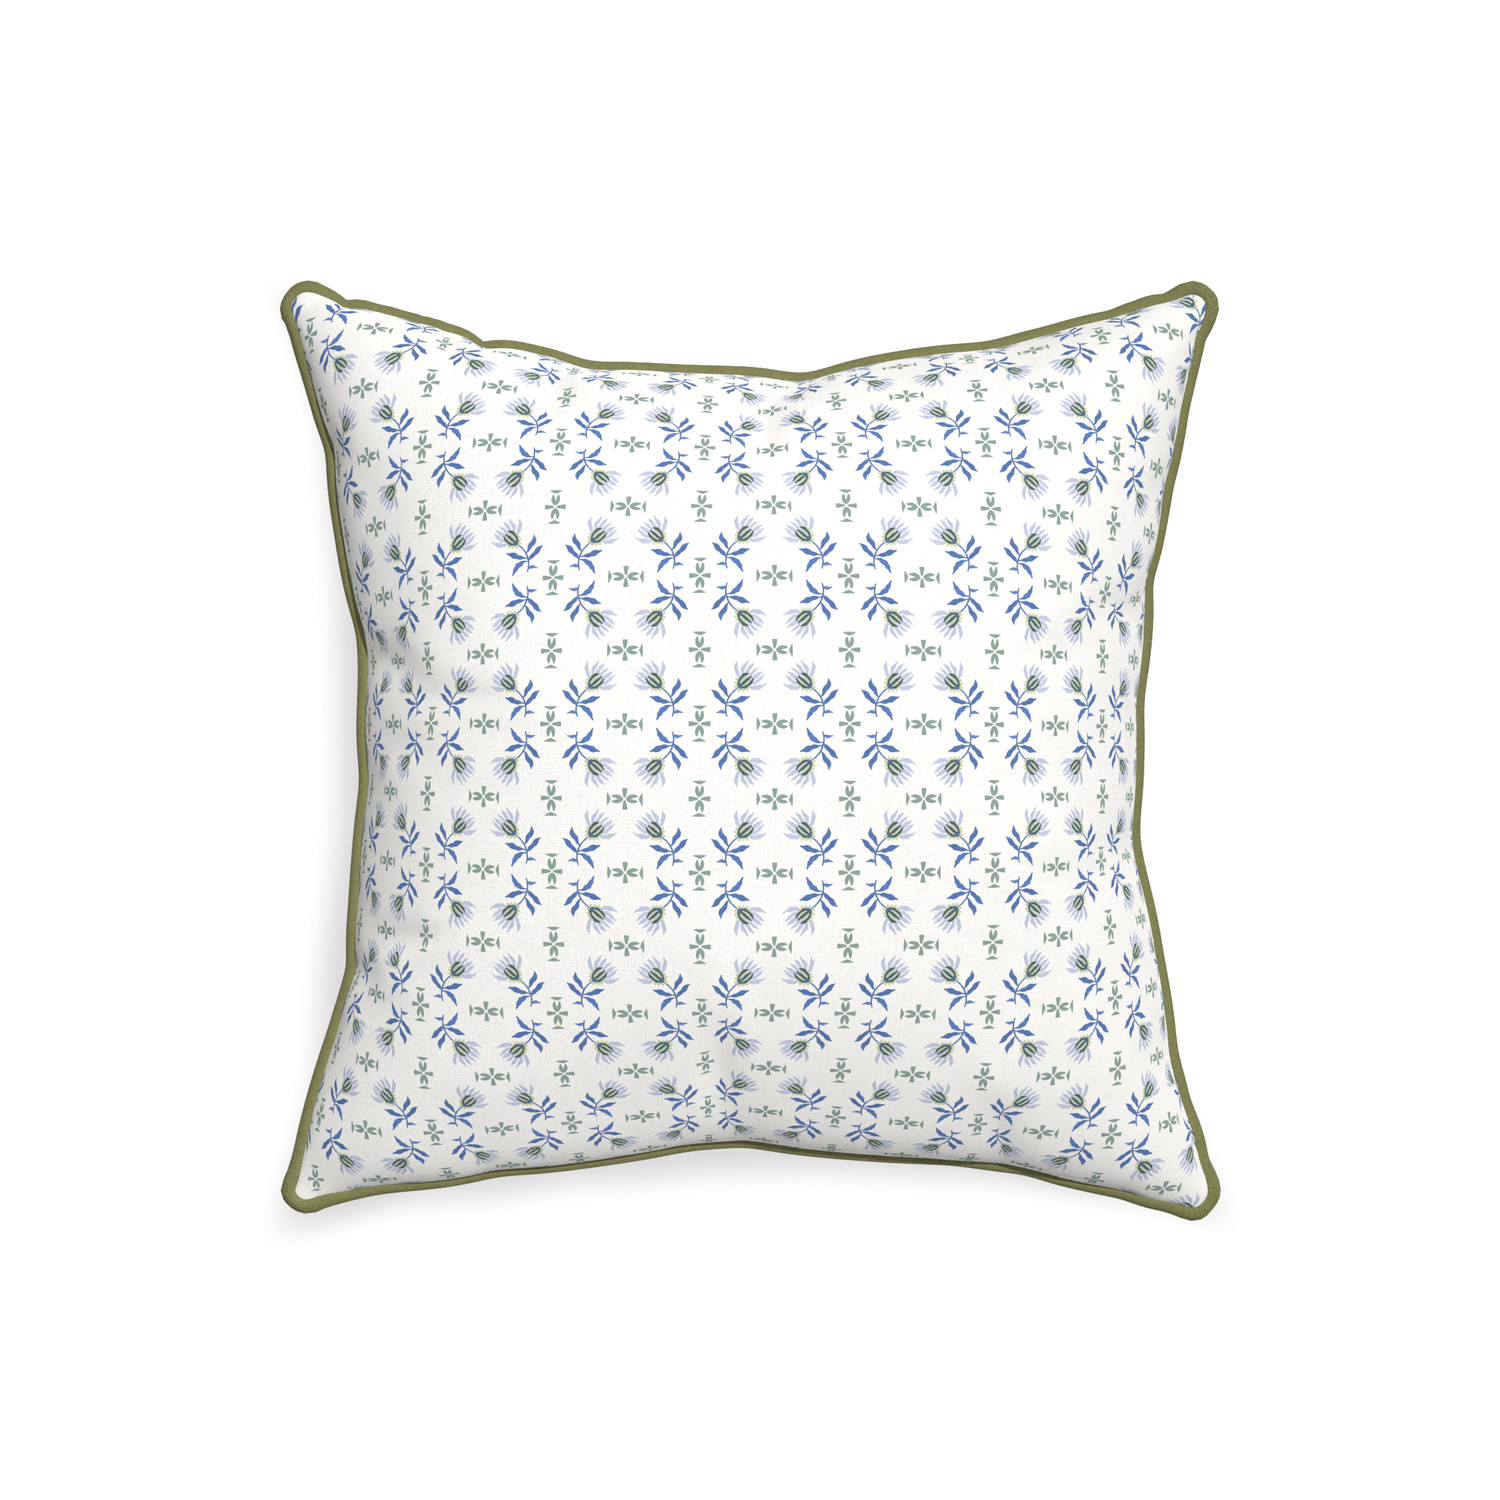 20-square lee custom blue & green floralpillow with moss piping on white background